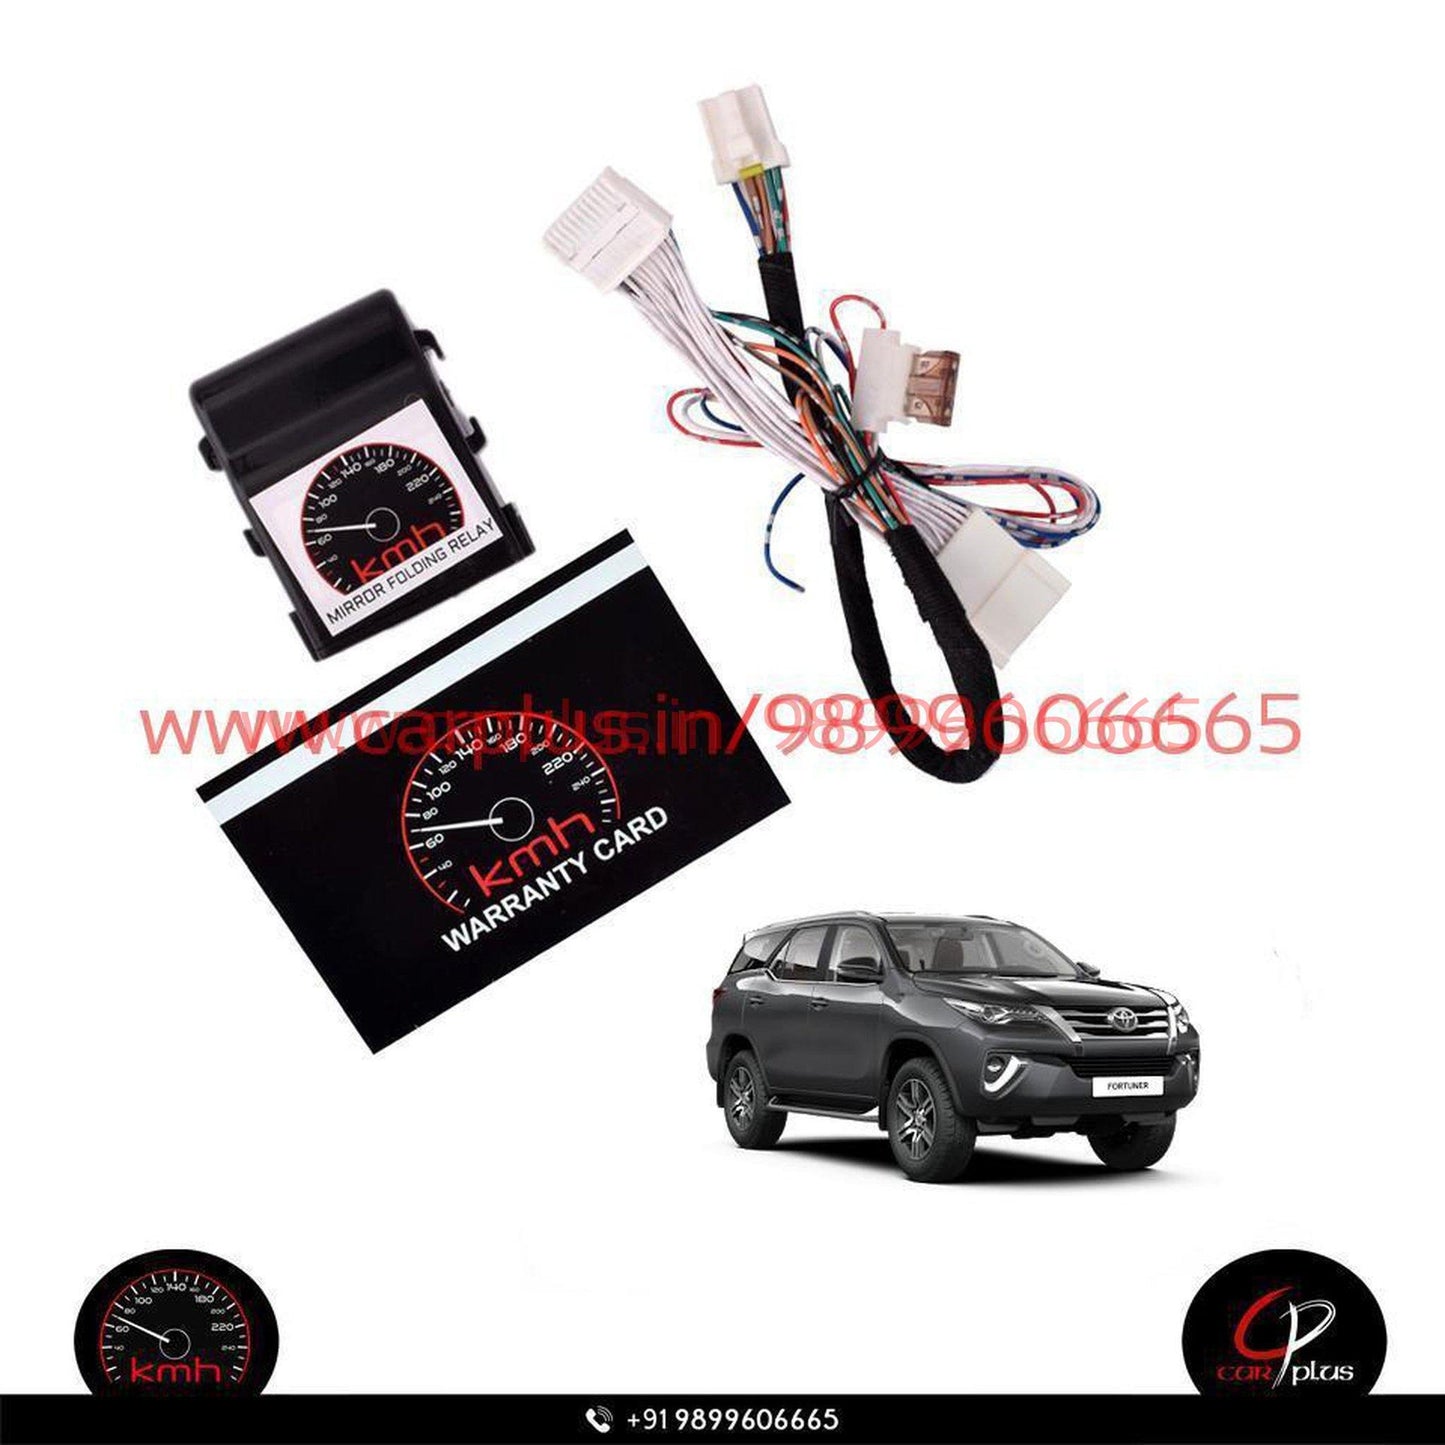 
                  
                    KMH Side Mirror Folding Relay For Toyota Cars KMH-MIRROR FOLDING RELAY MIRROR FOLDING RELAY.
                  
                